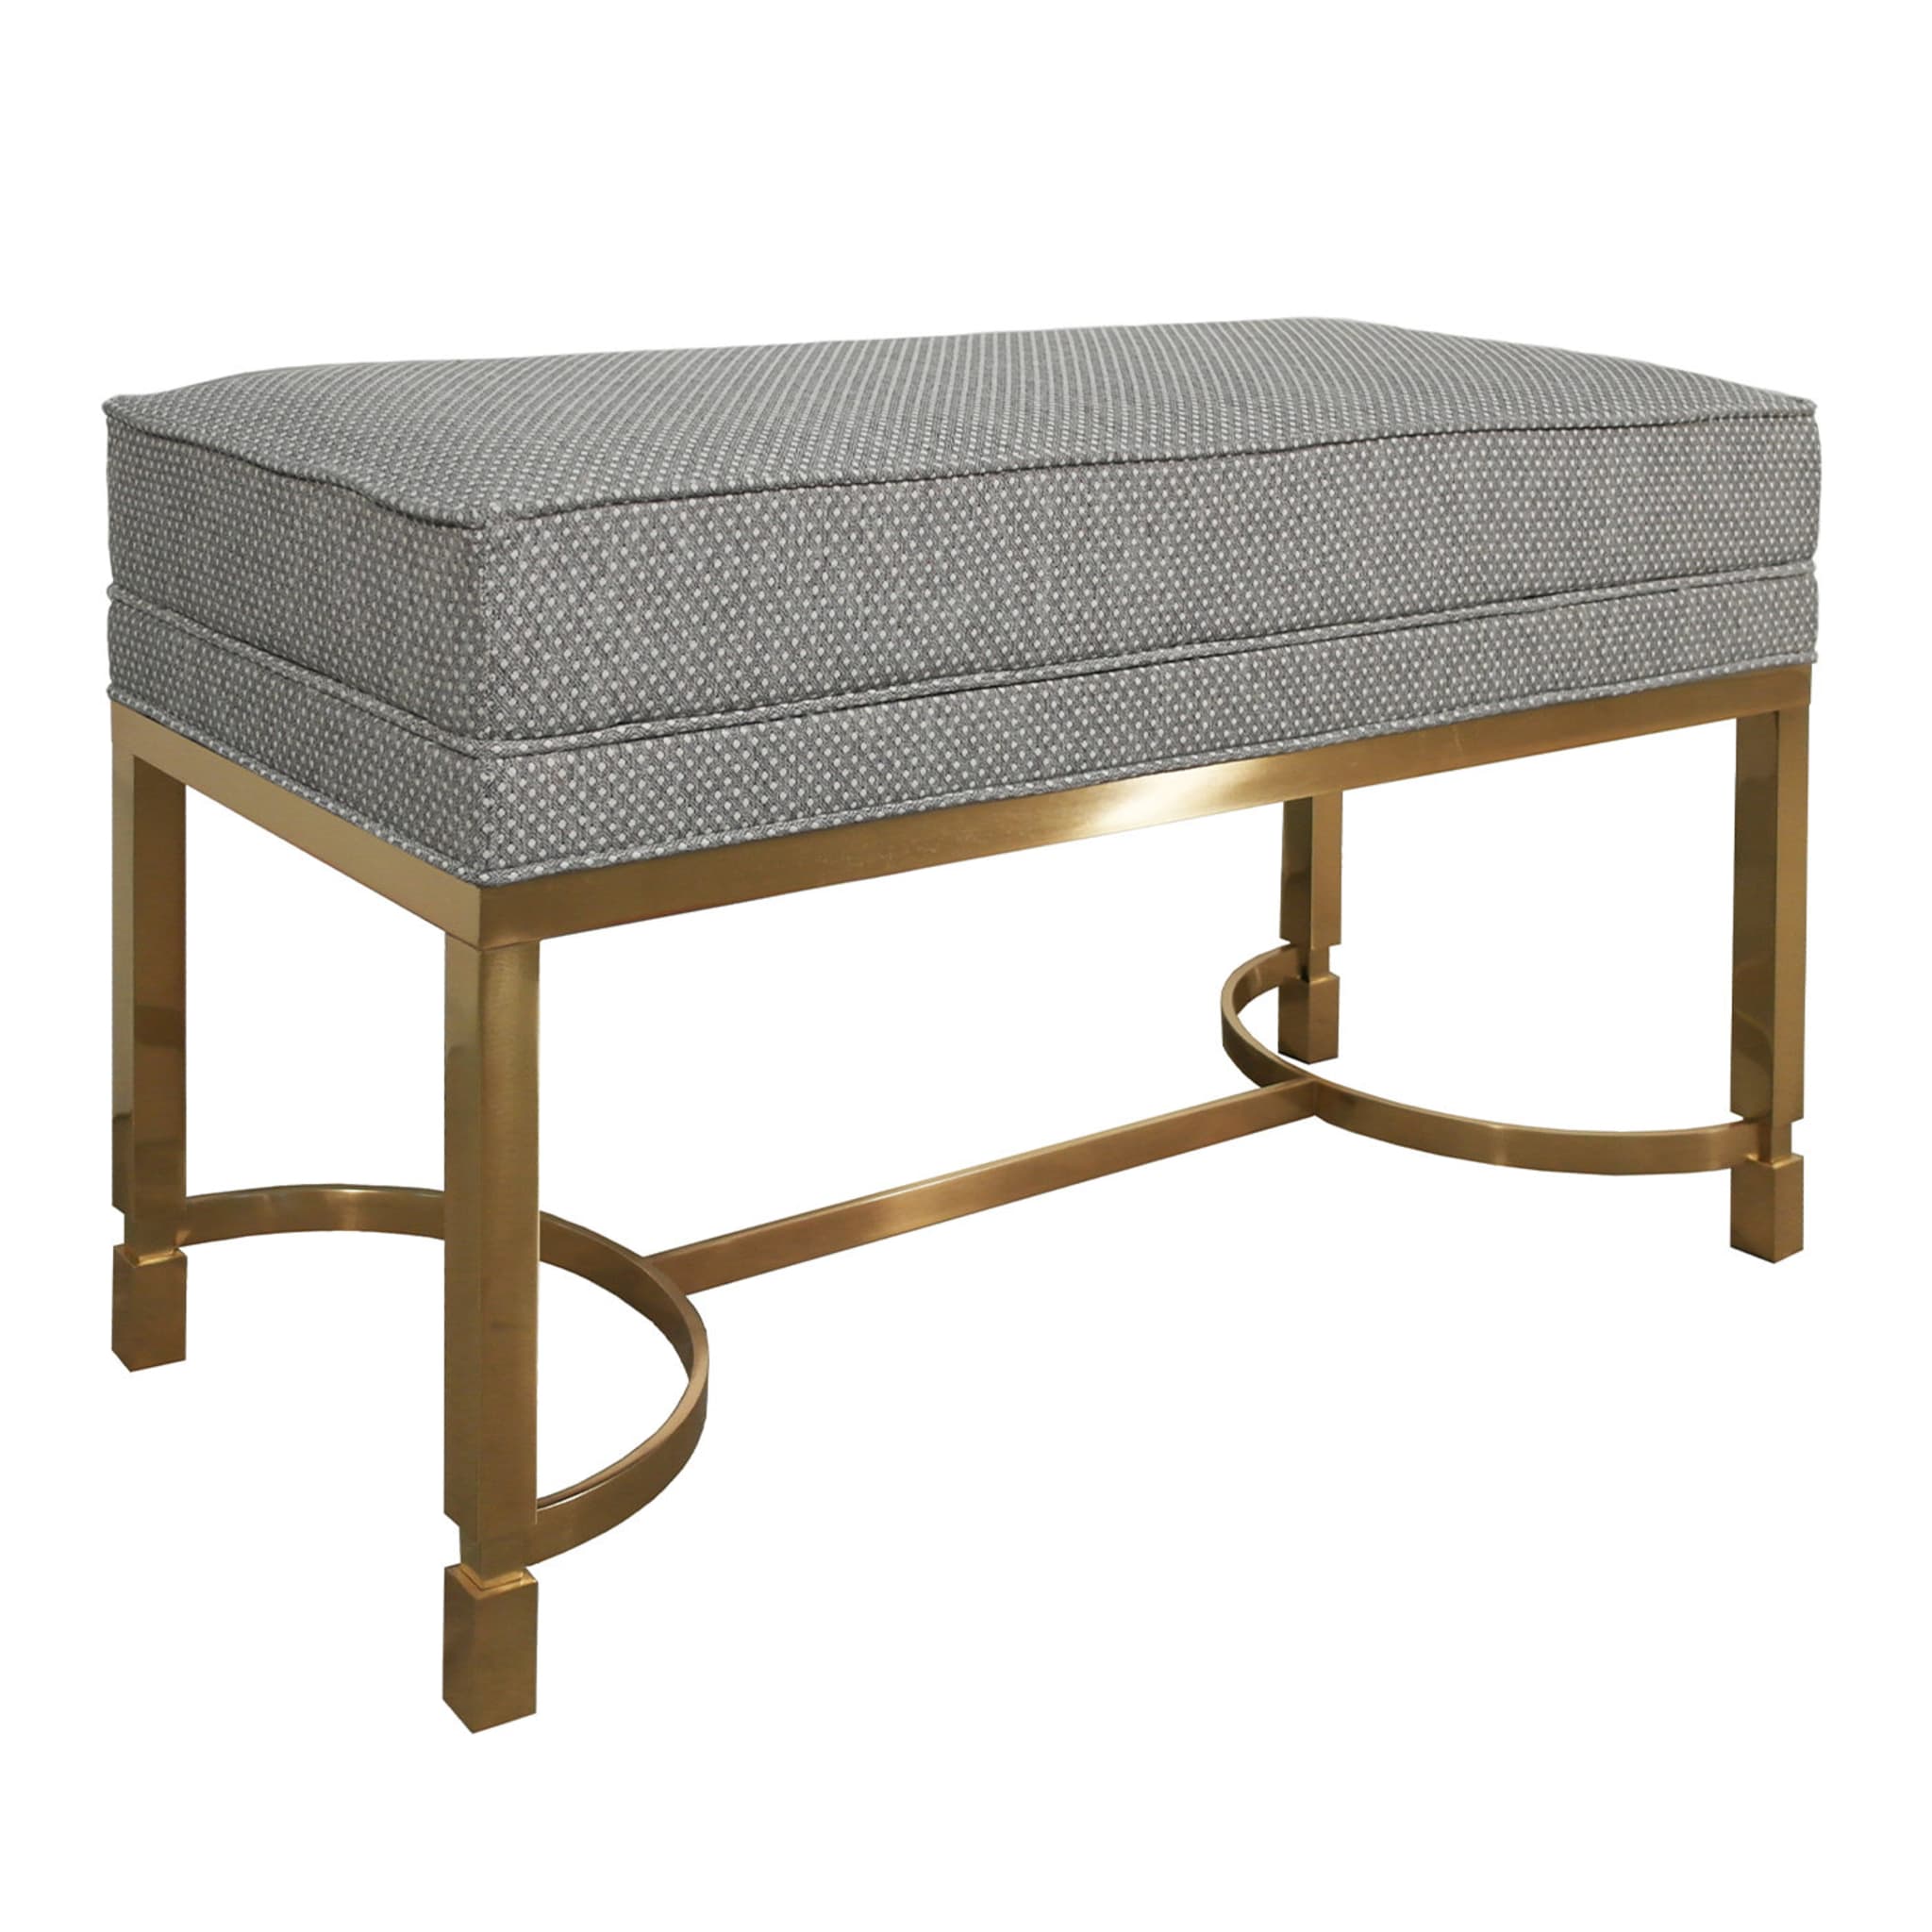 Two-Tone Upholstered Bench - Main view